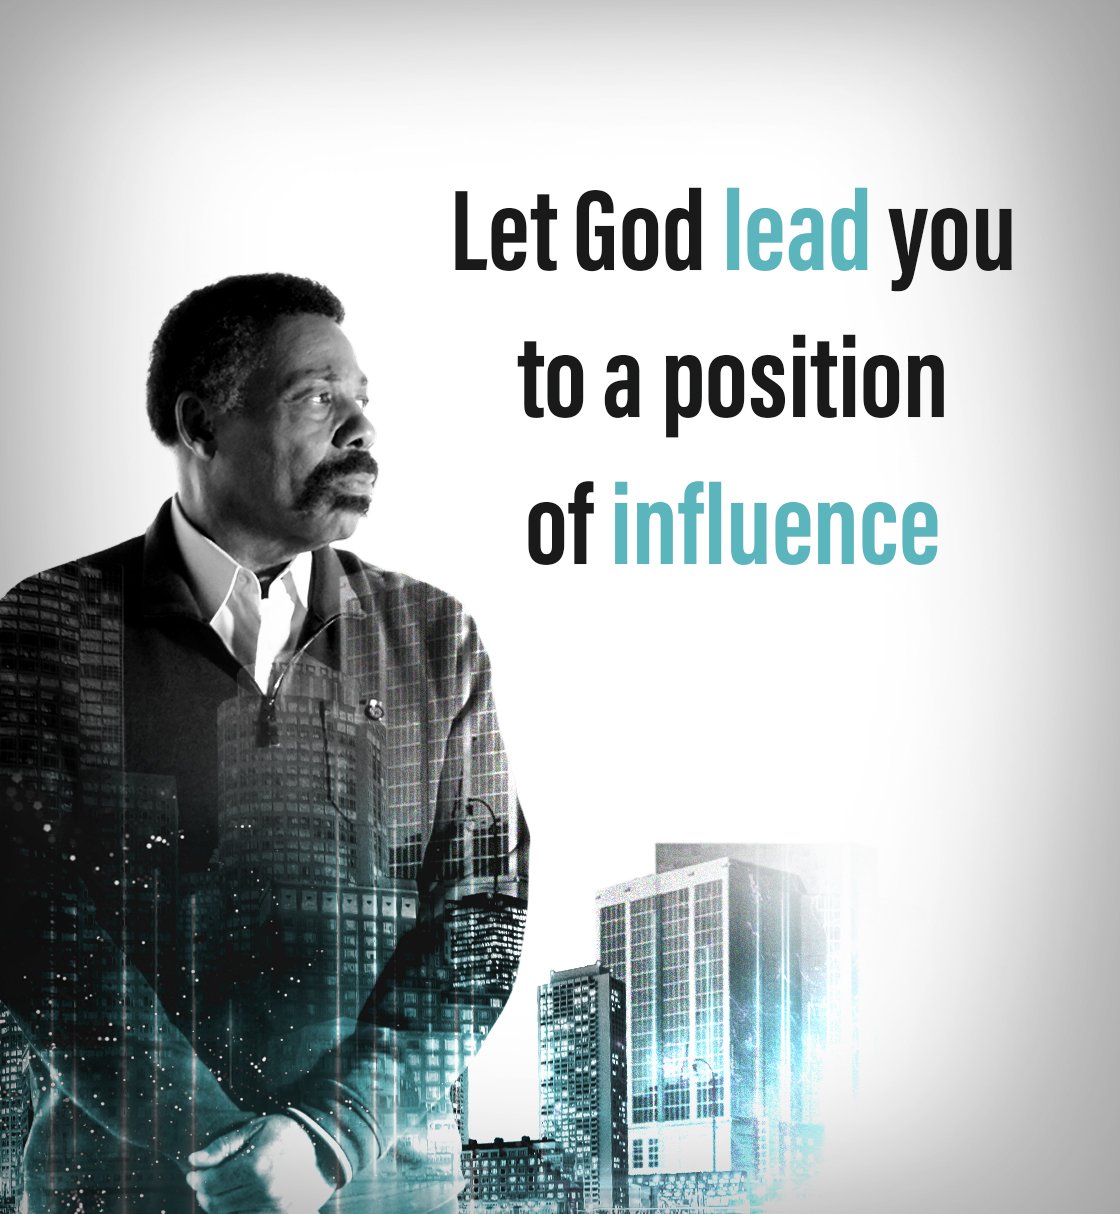 Let God lead you to a position of influence